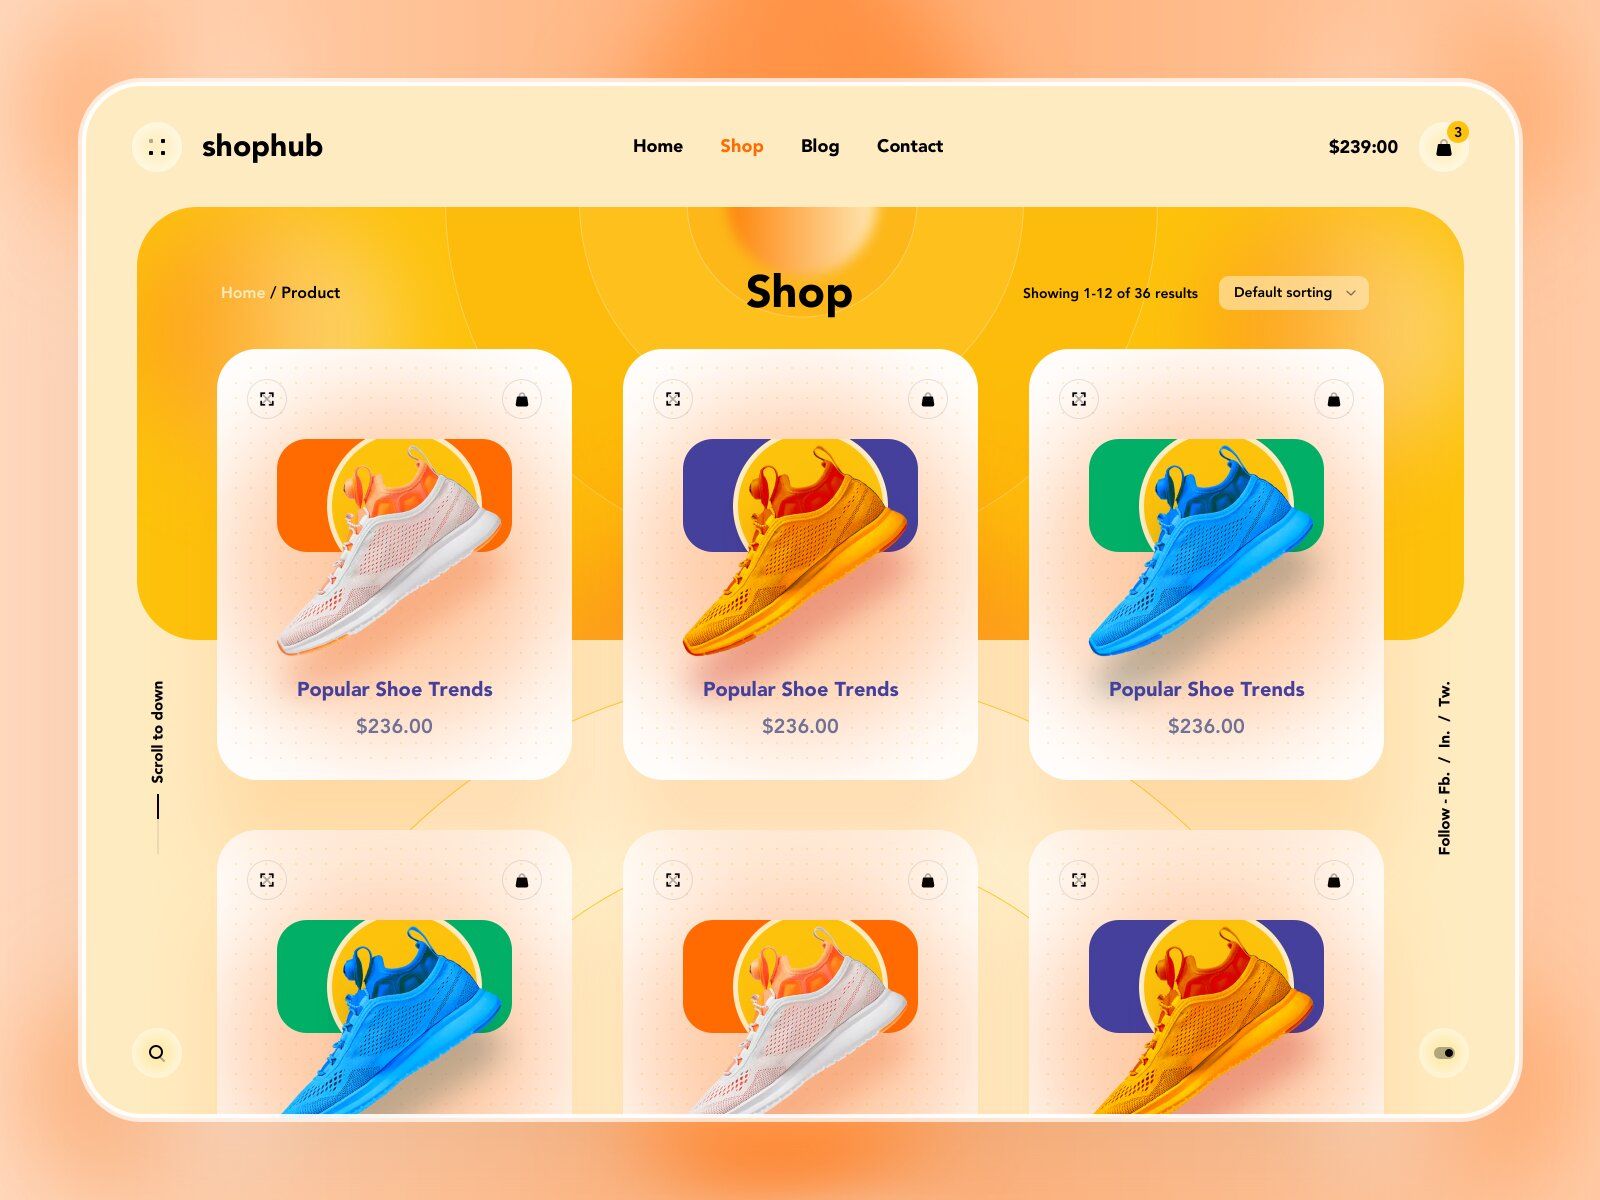 Marketplace platform for selling sneakers (*image by [Shah Alam](https://dribbble.com/uiuxalam){ rel="nofollow" target="_blank" .default-md}*)